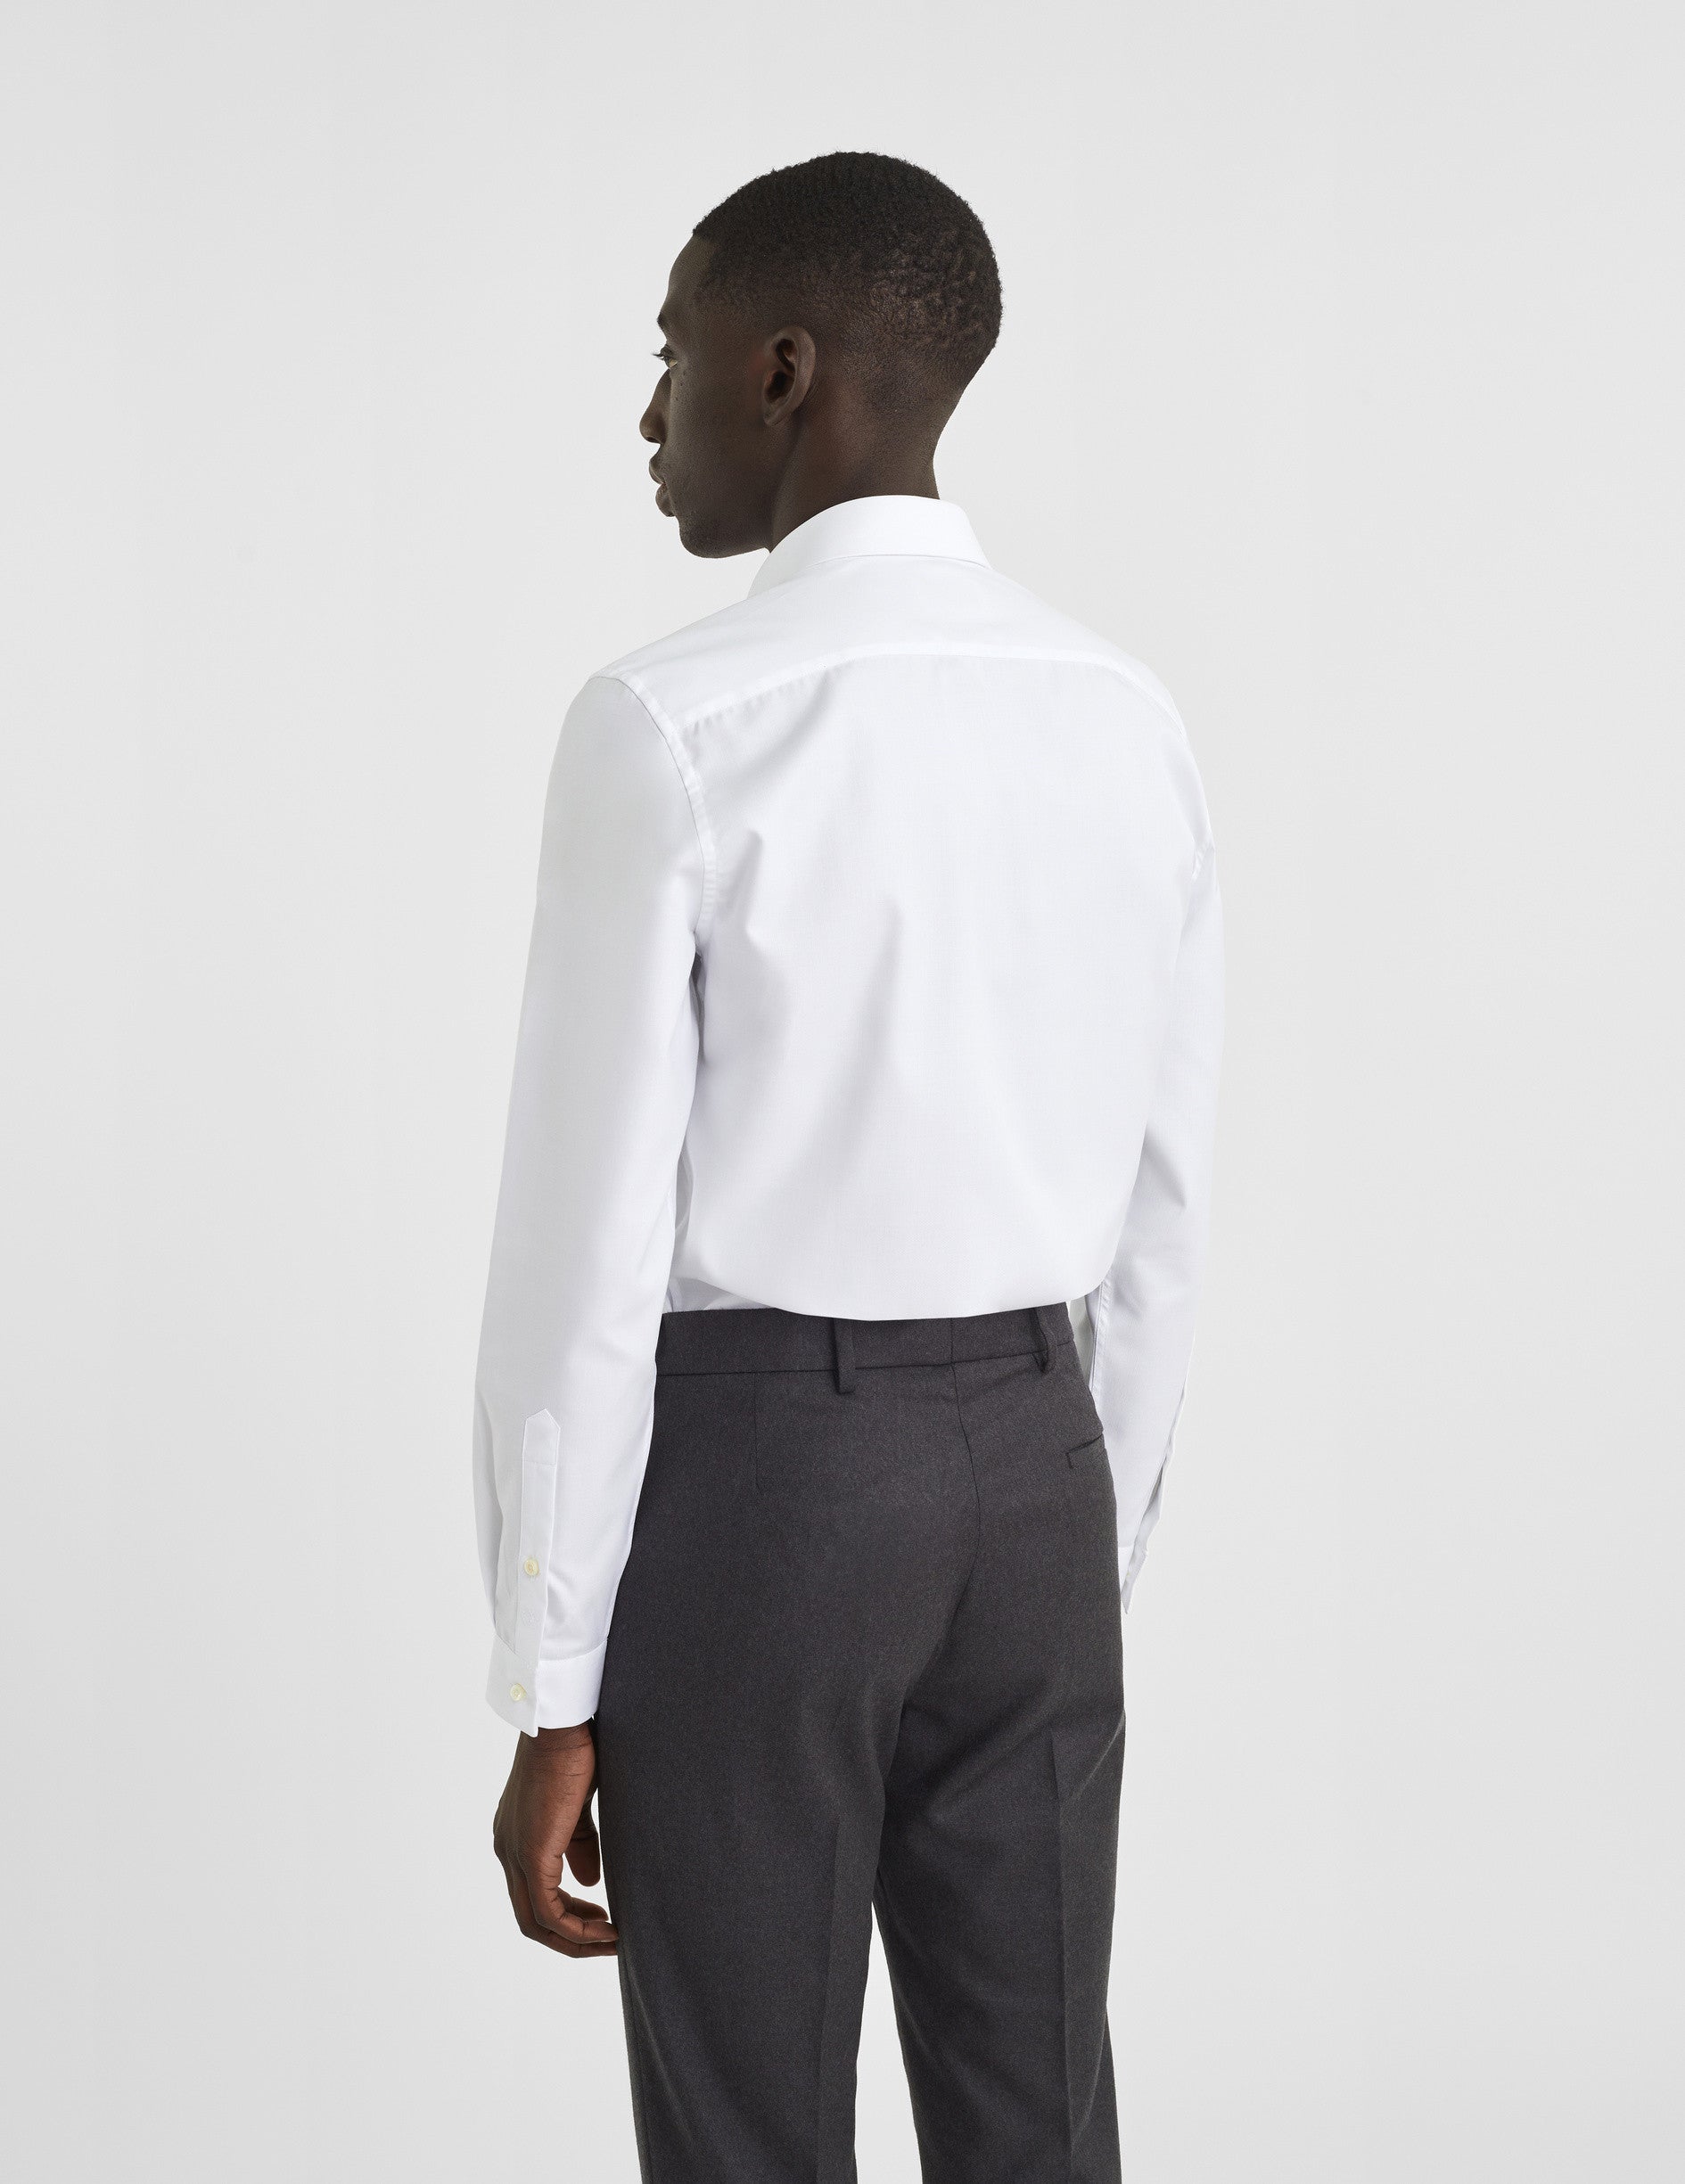 Fitted white shirt - Shaped - Thin Collar